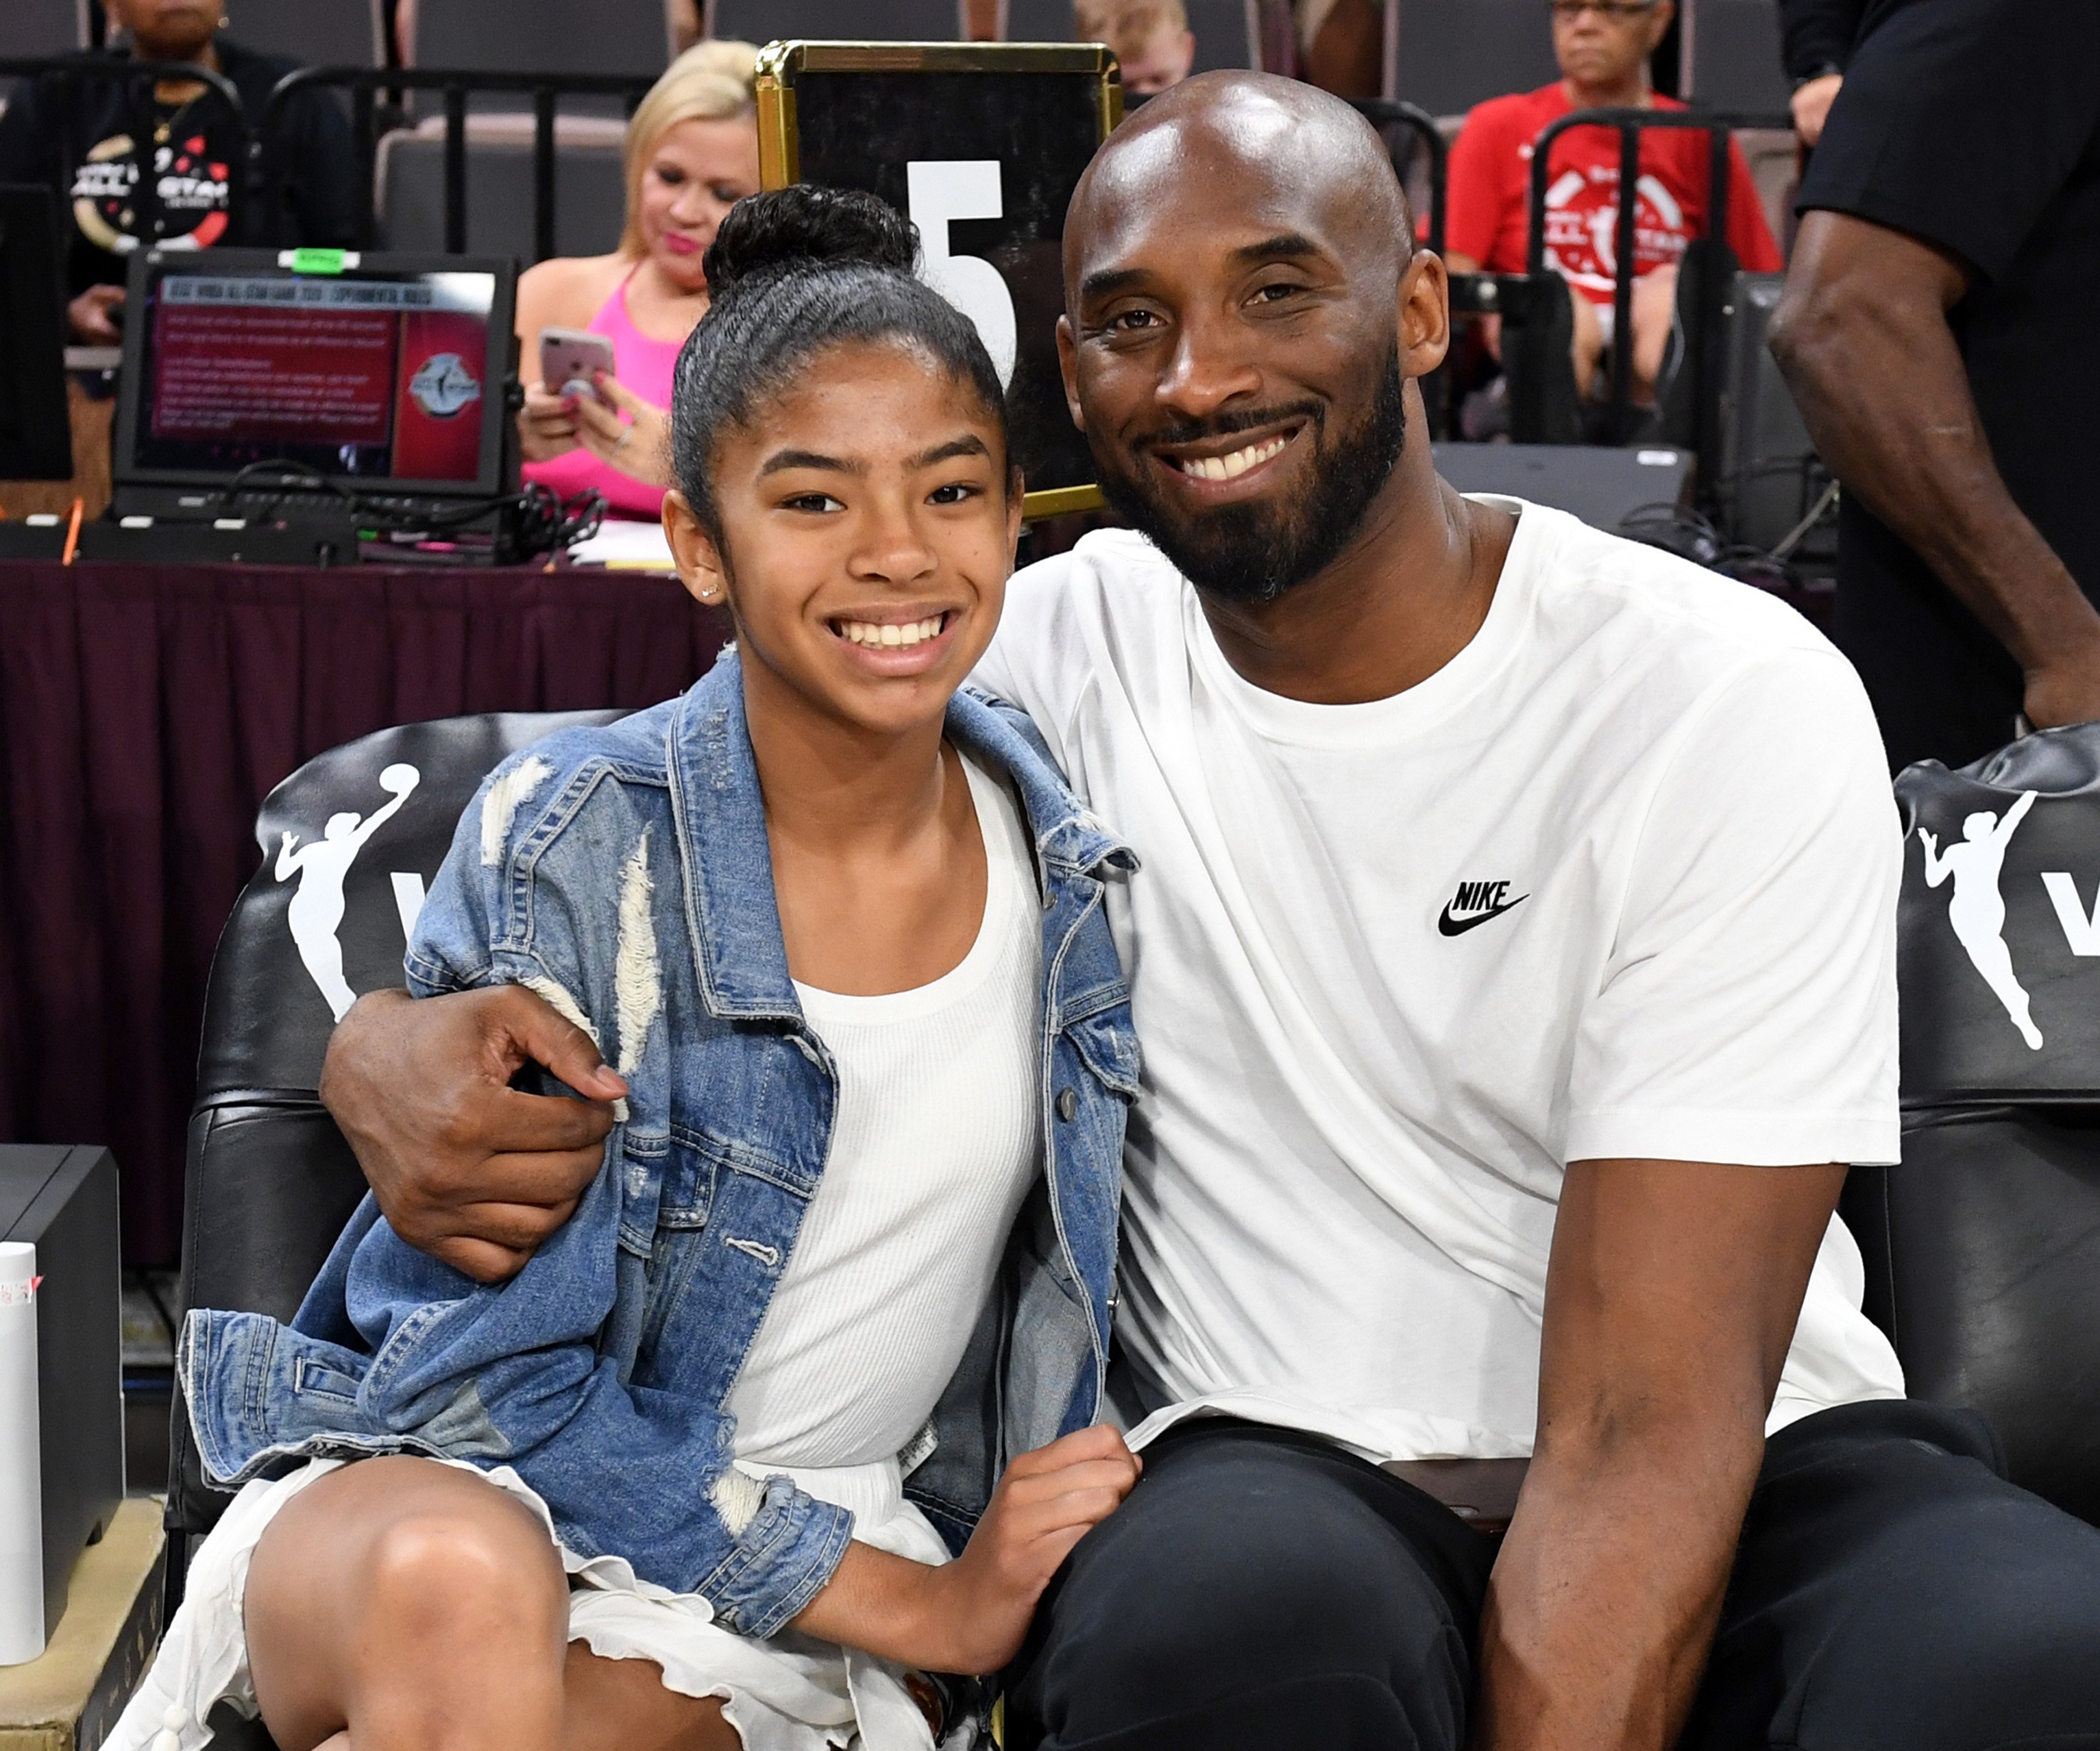 Gianna and Kobe Bryant attending the WNBA All-Star Game in July 2019. | Photo: Getty Images